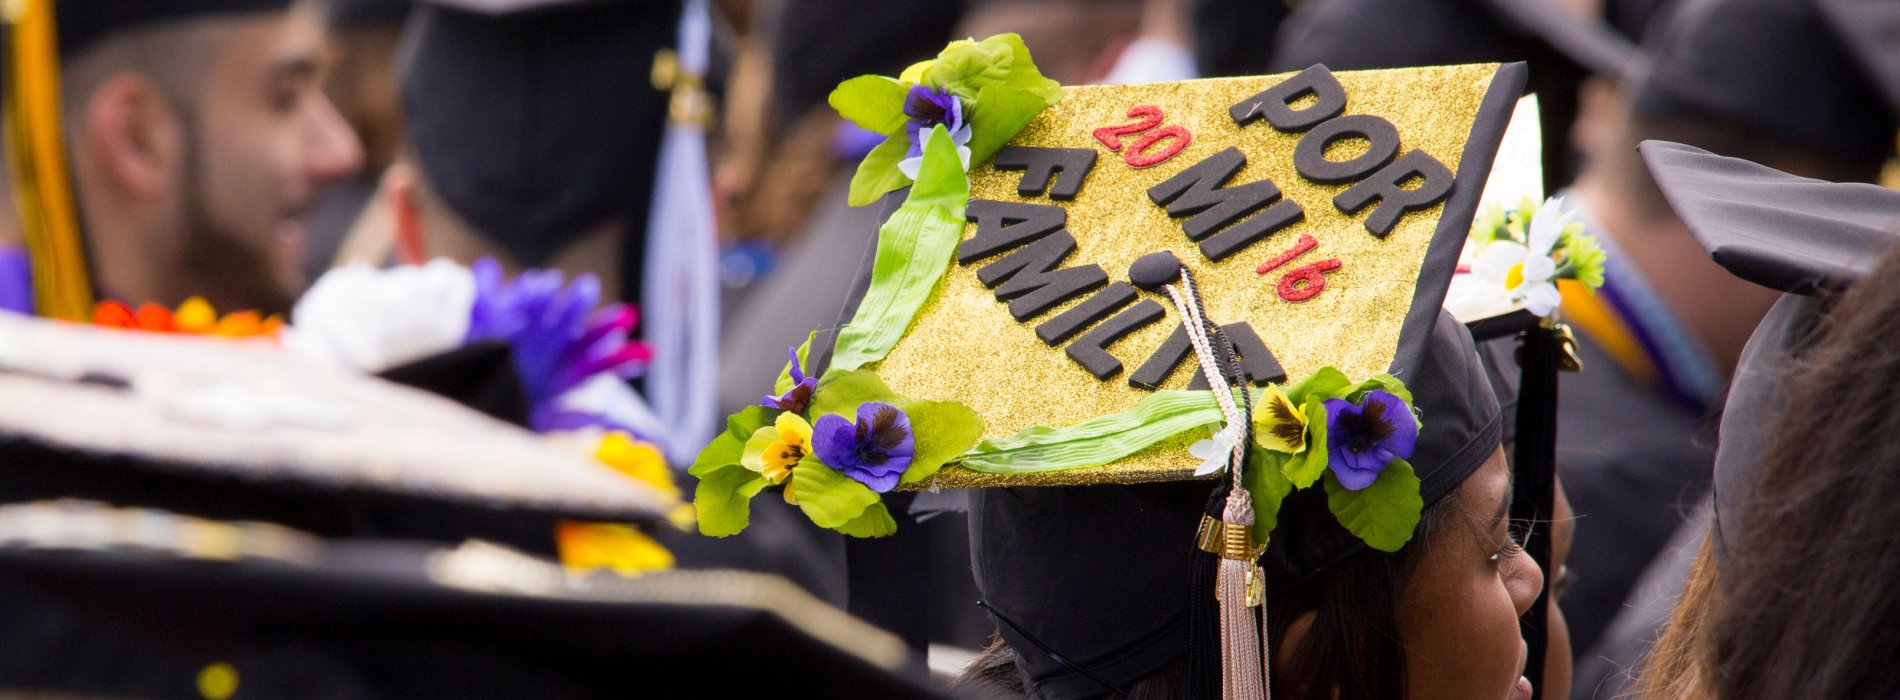 A student's graduation cap decorated with the words "Por Mi Familia" and "2016" against a gold background with purple and yellow flowers.